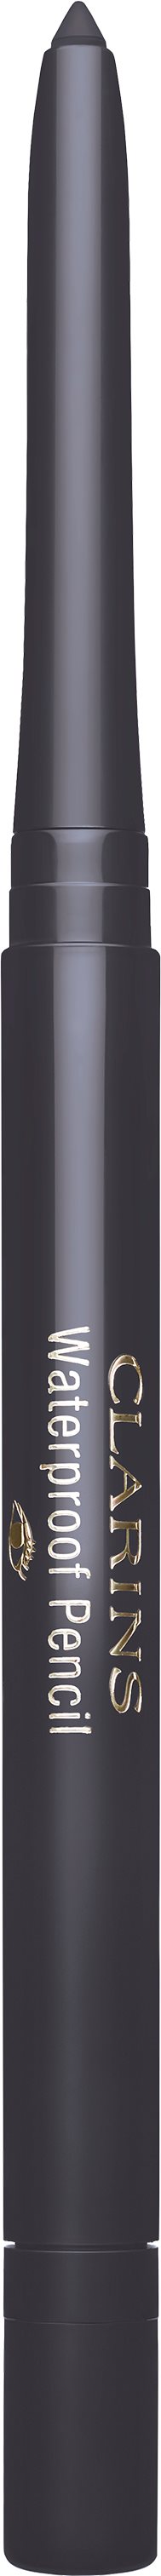 Clarins Water-Proof Pencil Eyelinger 06 (Smoked Wood)